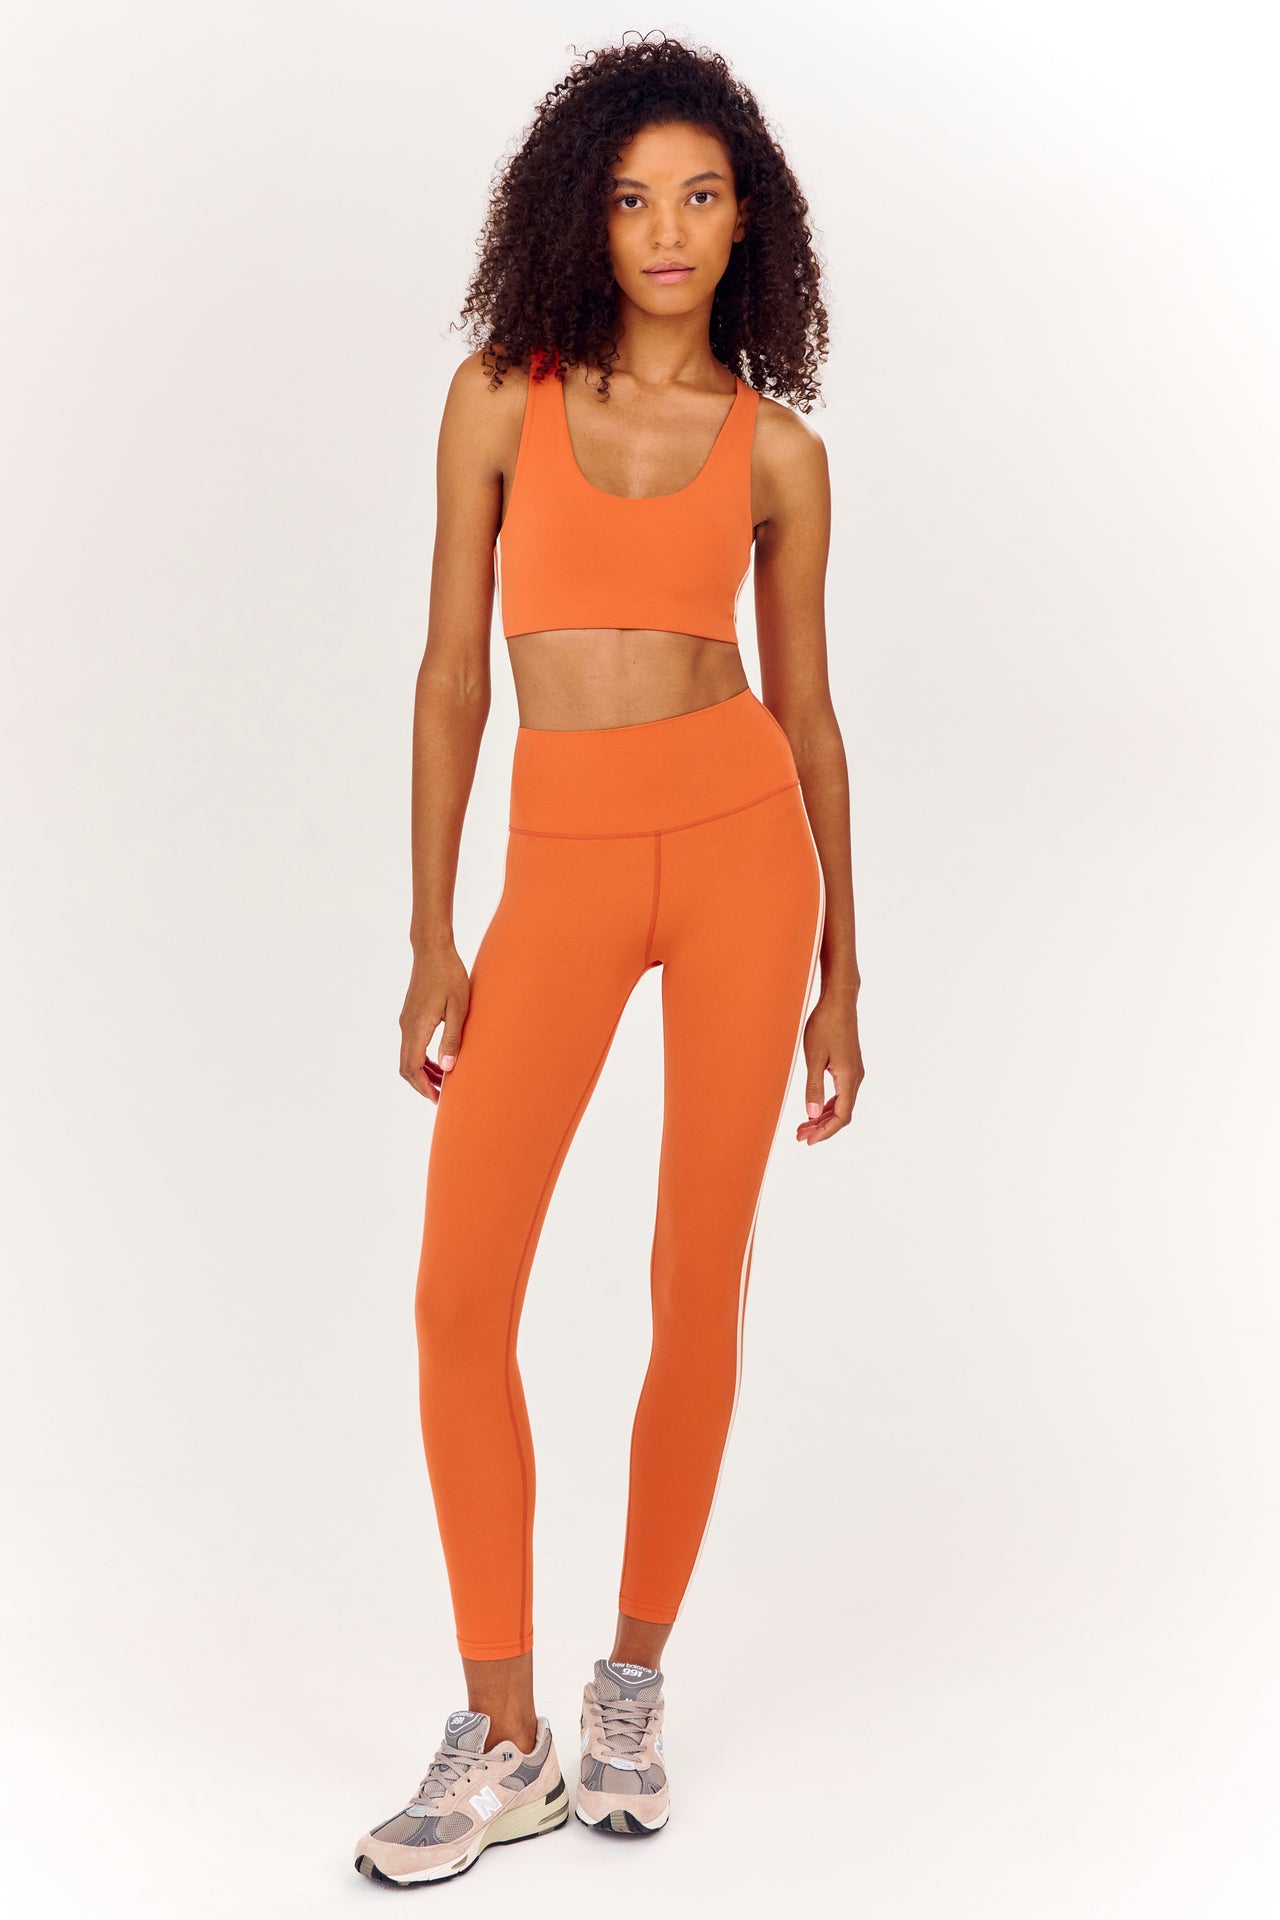 Full front view of girl wearing orange sports bra with two thin white stripes  down the side and orange leggings with white shoes